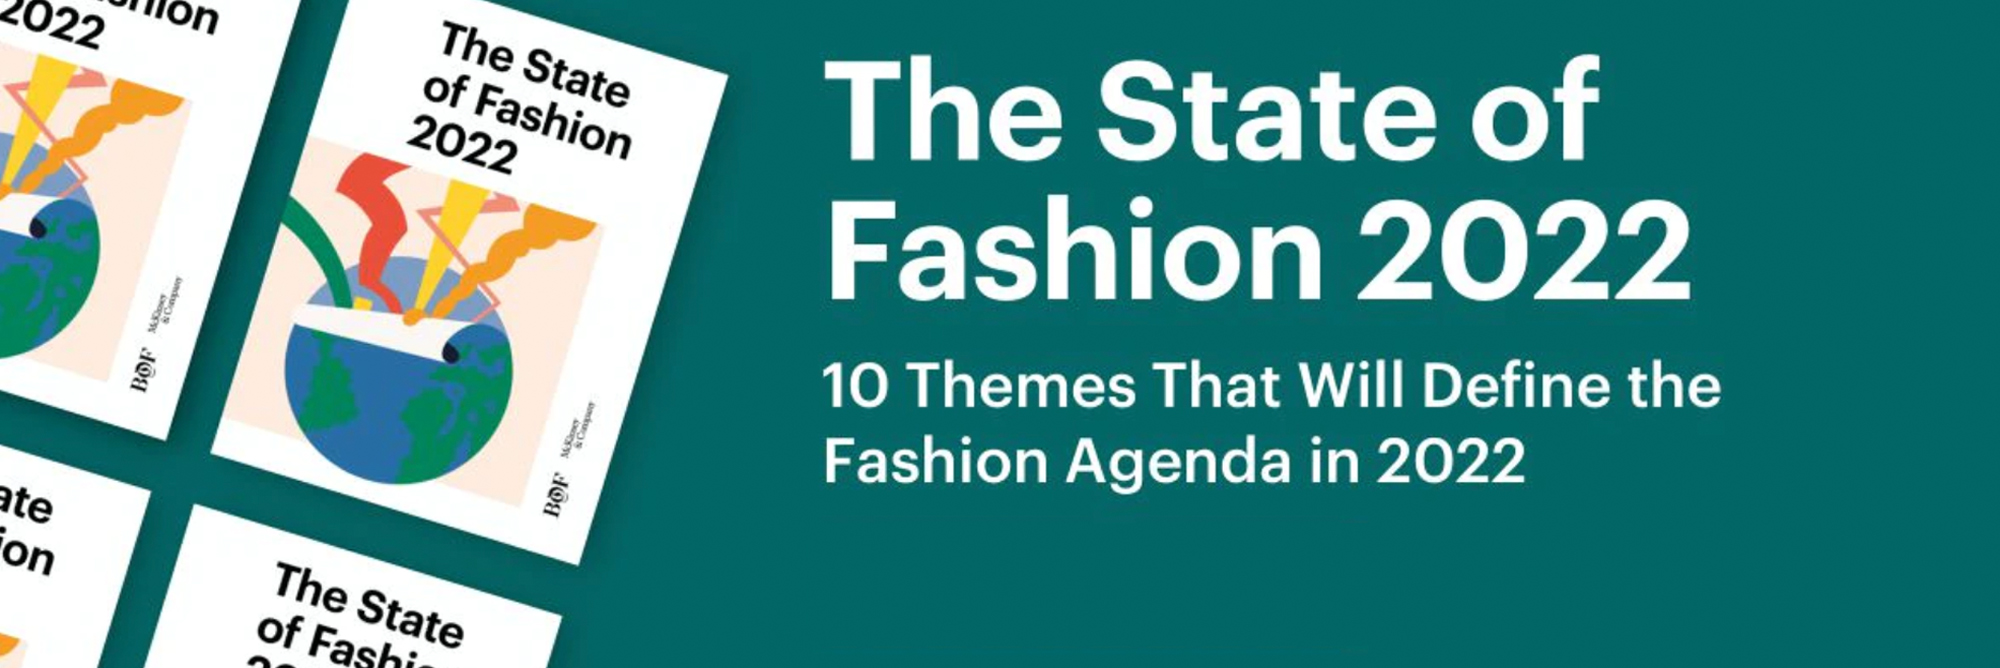 The State of Fashion